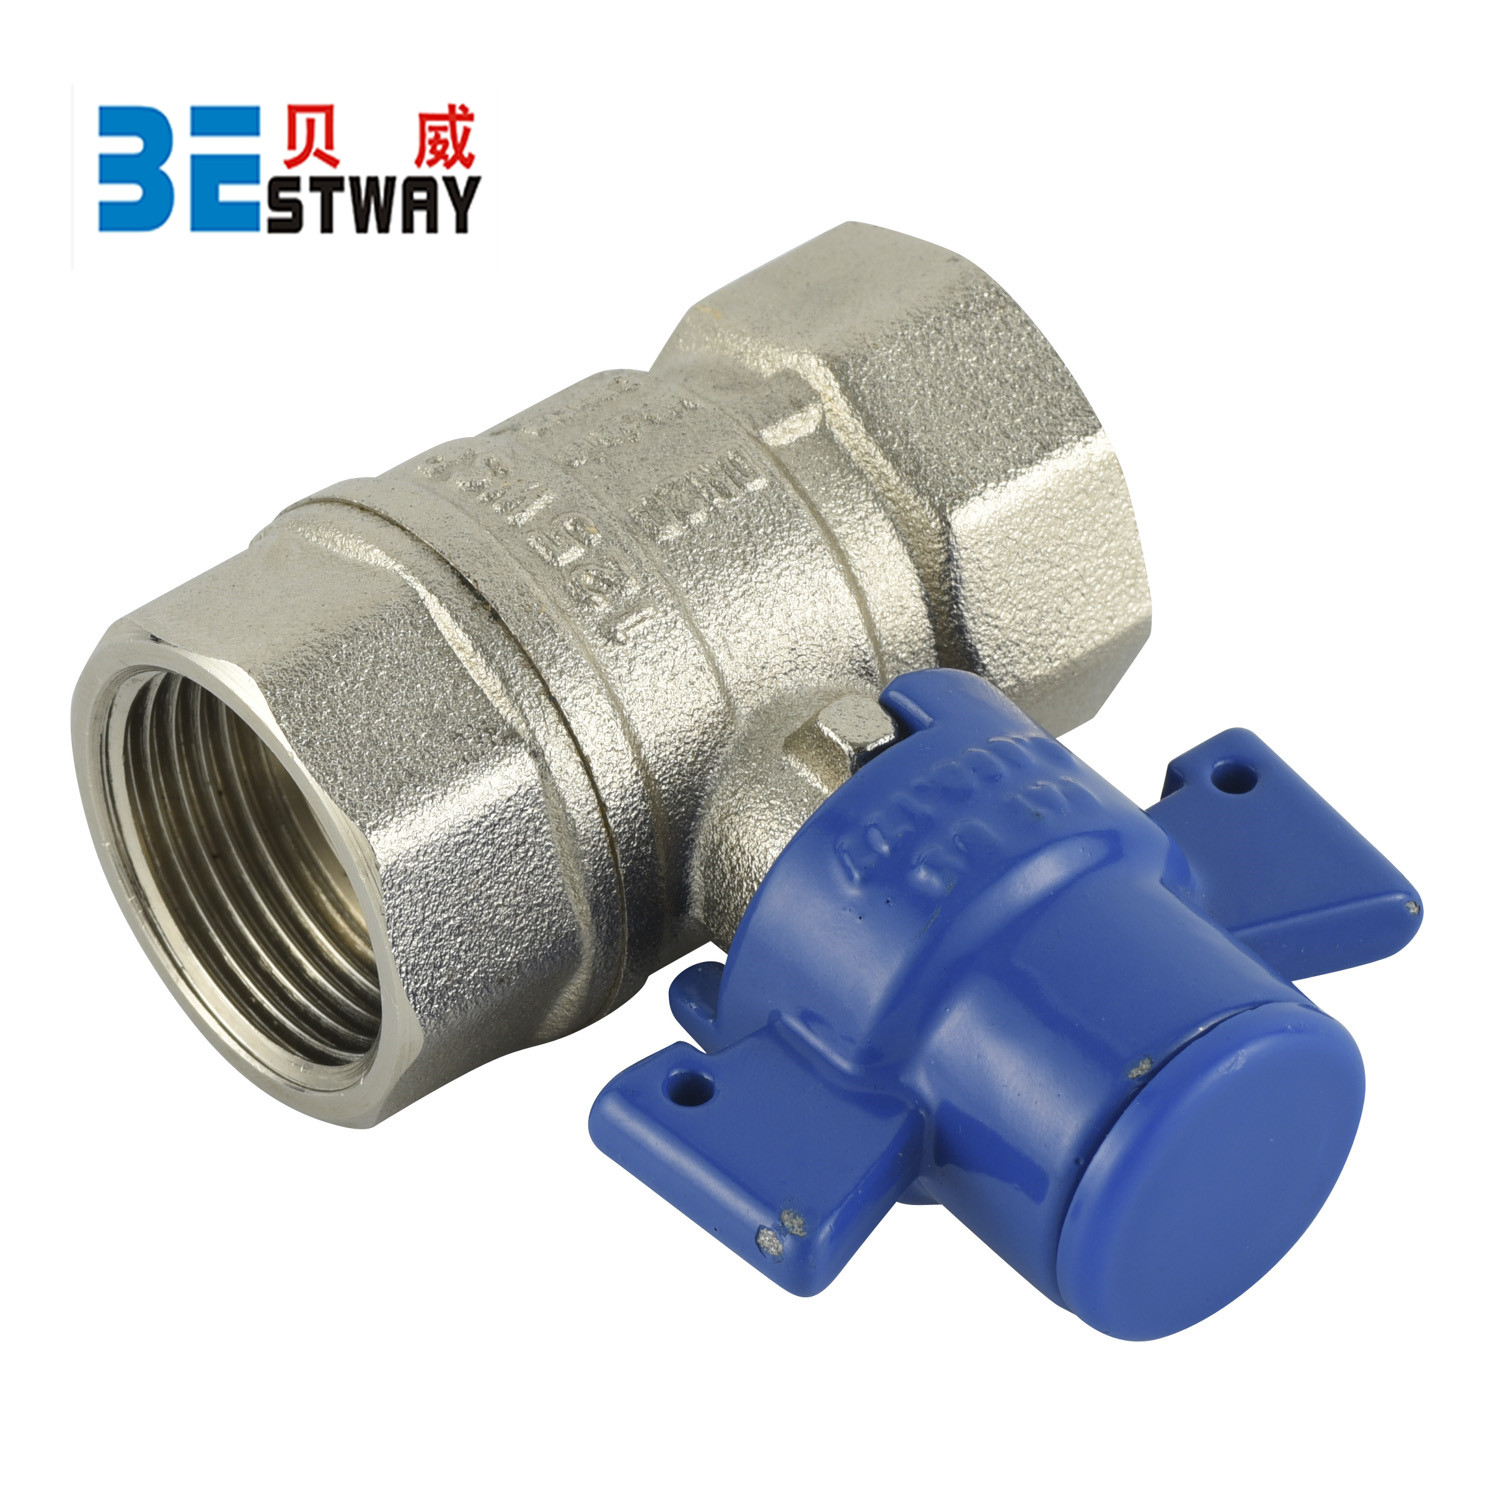 Hot Forged Brass Ball Valve with Lock for Water Meter